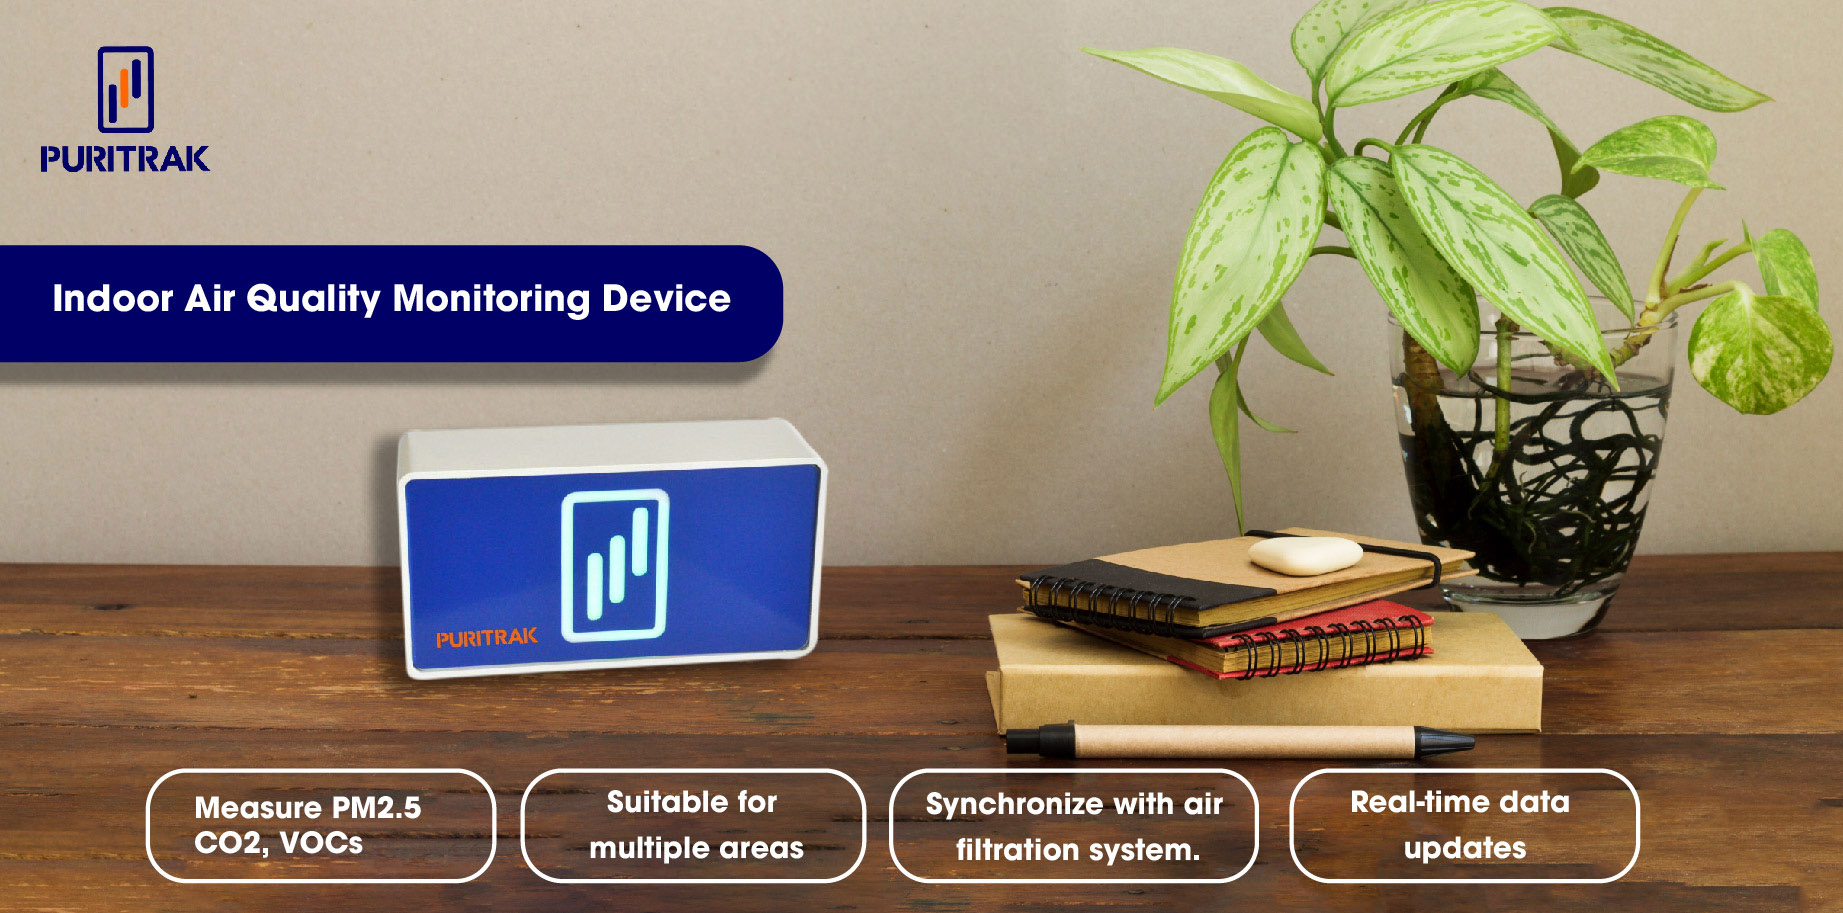 Puritrak Indoor Air Quality Monitoring Device